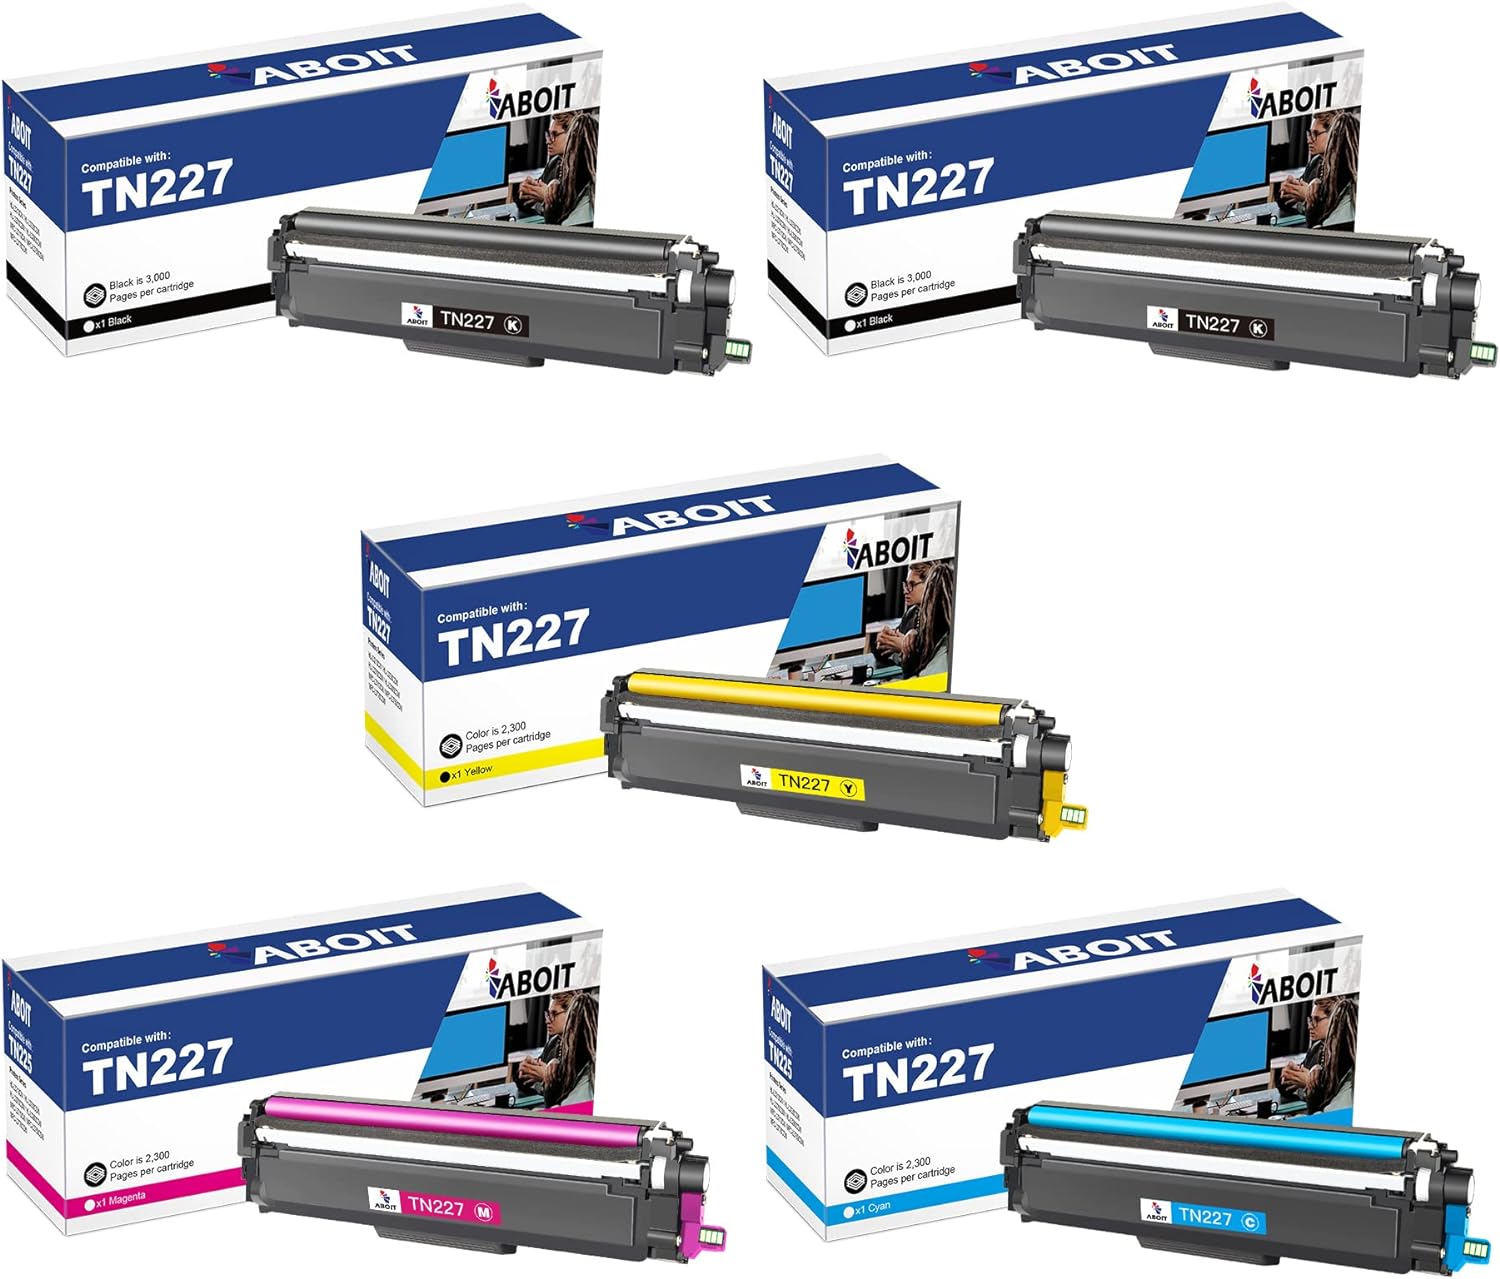 with Chips Black Magenta Yellow Blue-Combination Compatible Toner Cartridges for Brother TN227 TN223 Replacement for Brother HL-L3210cw L3230cdw L3270cdw Printer